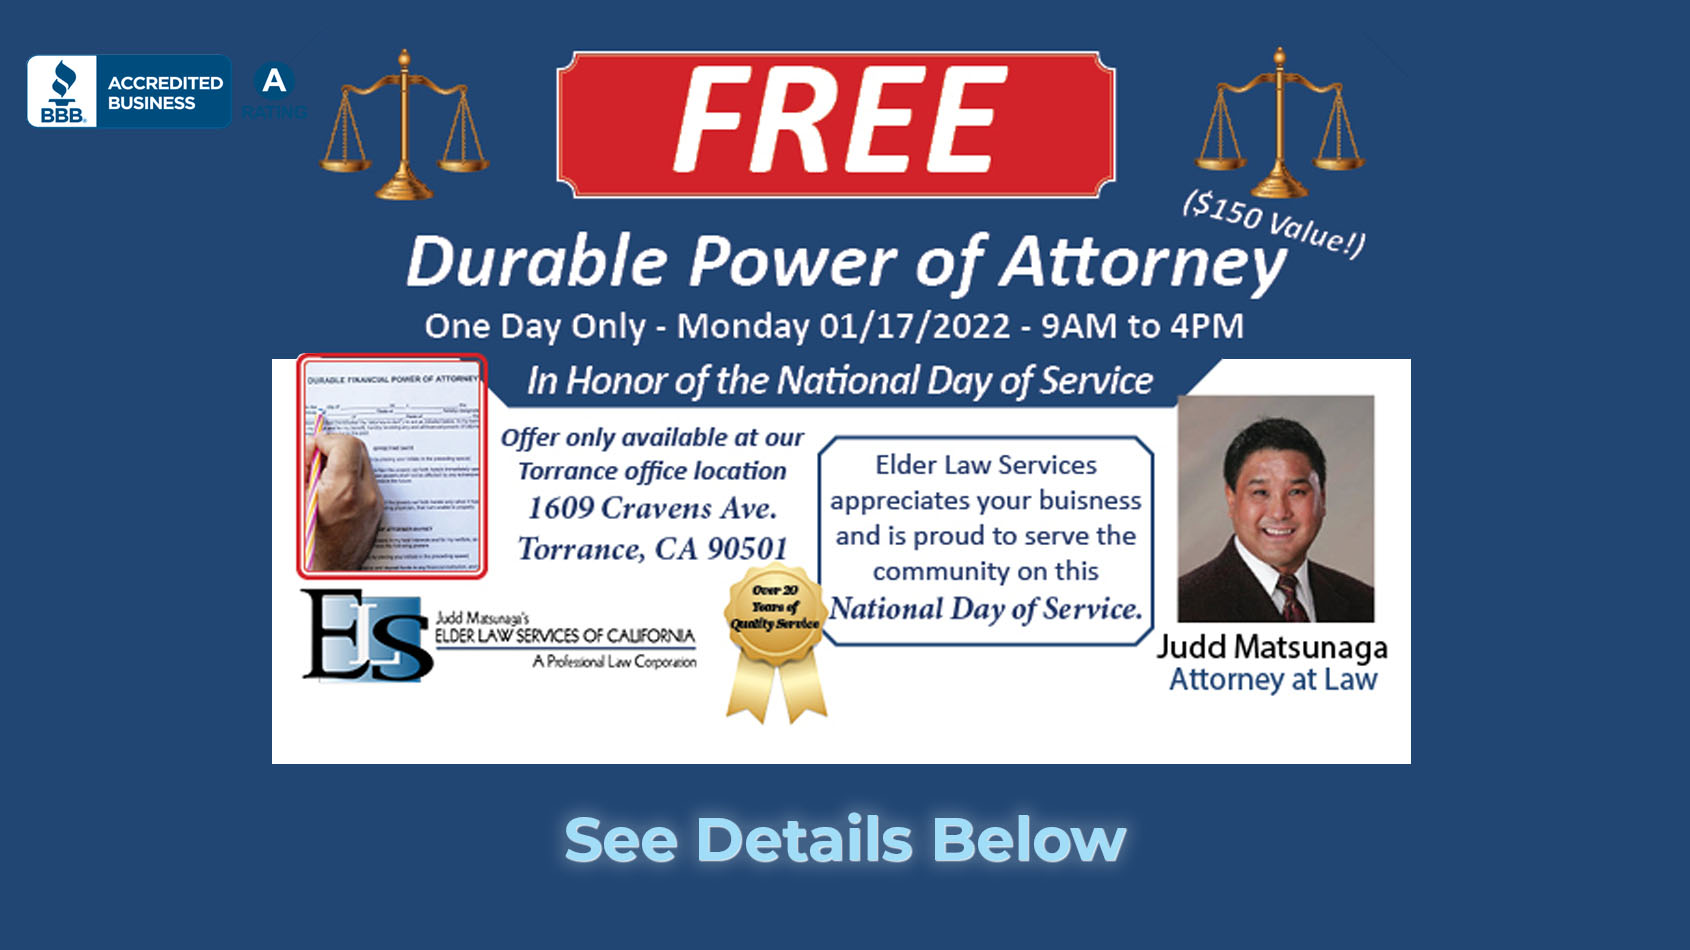 Durable Power of Attorney Offer